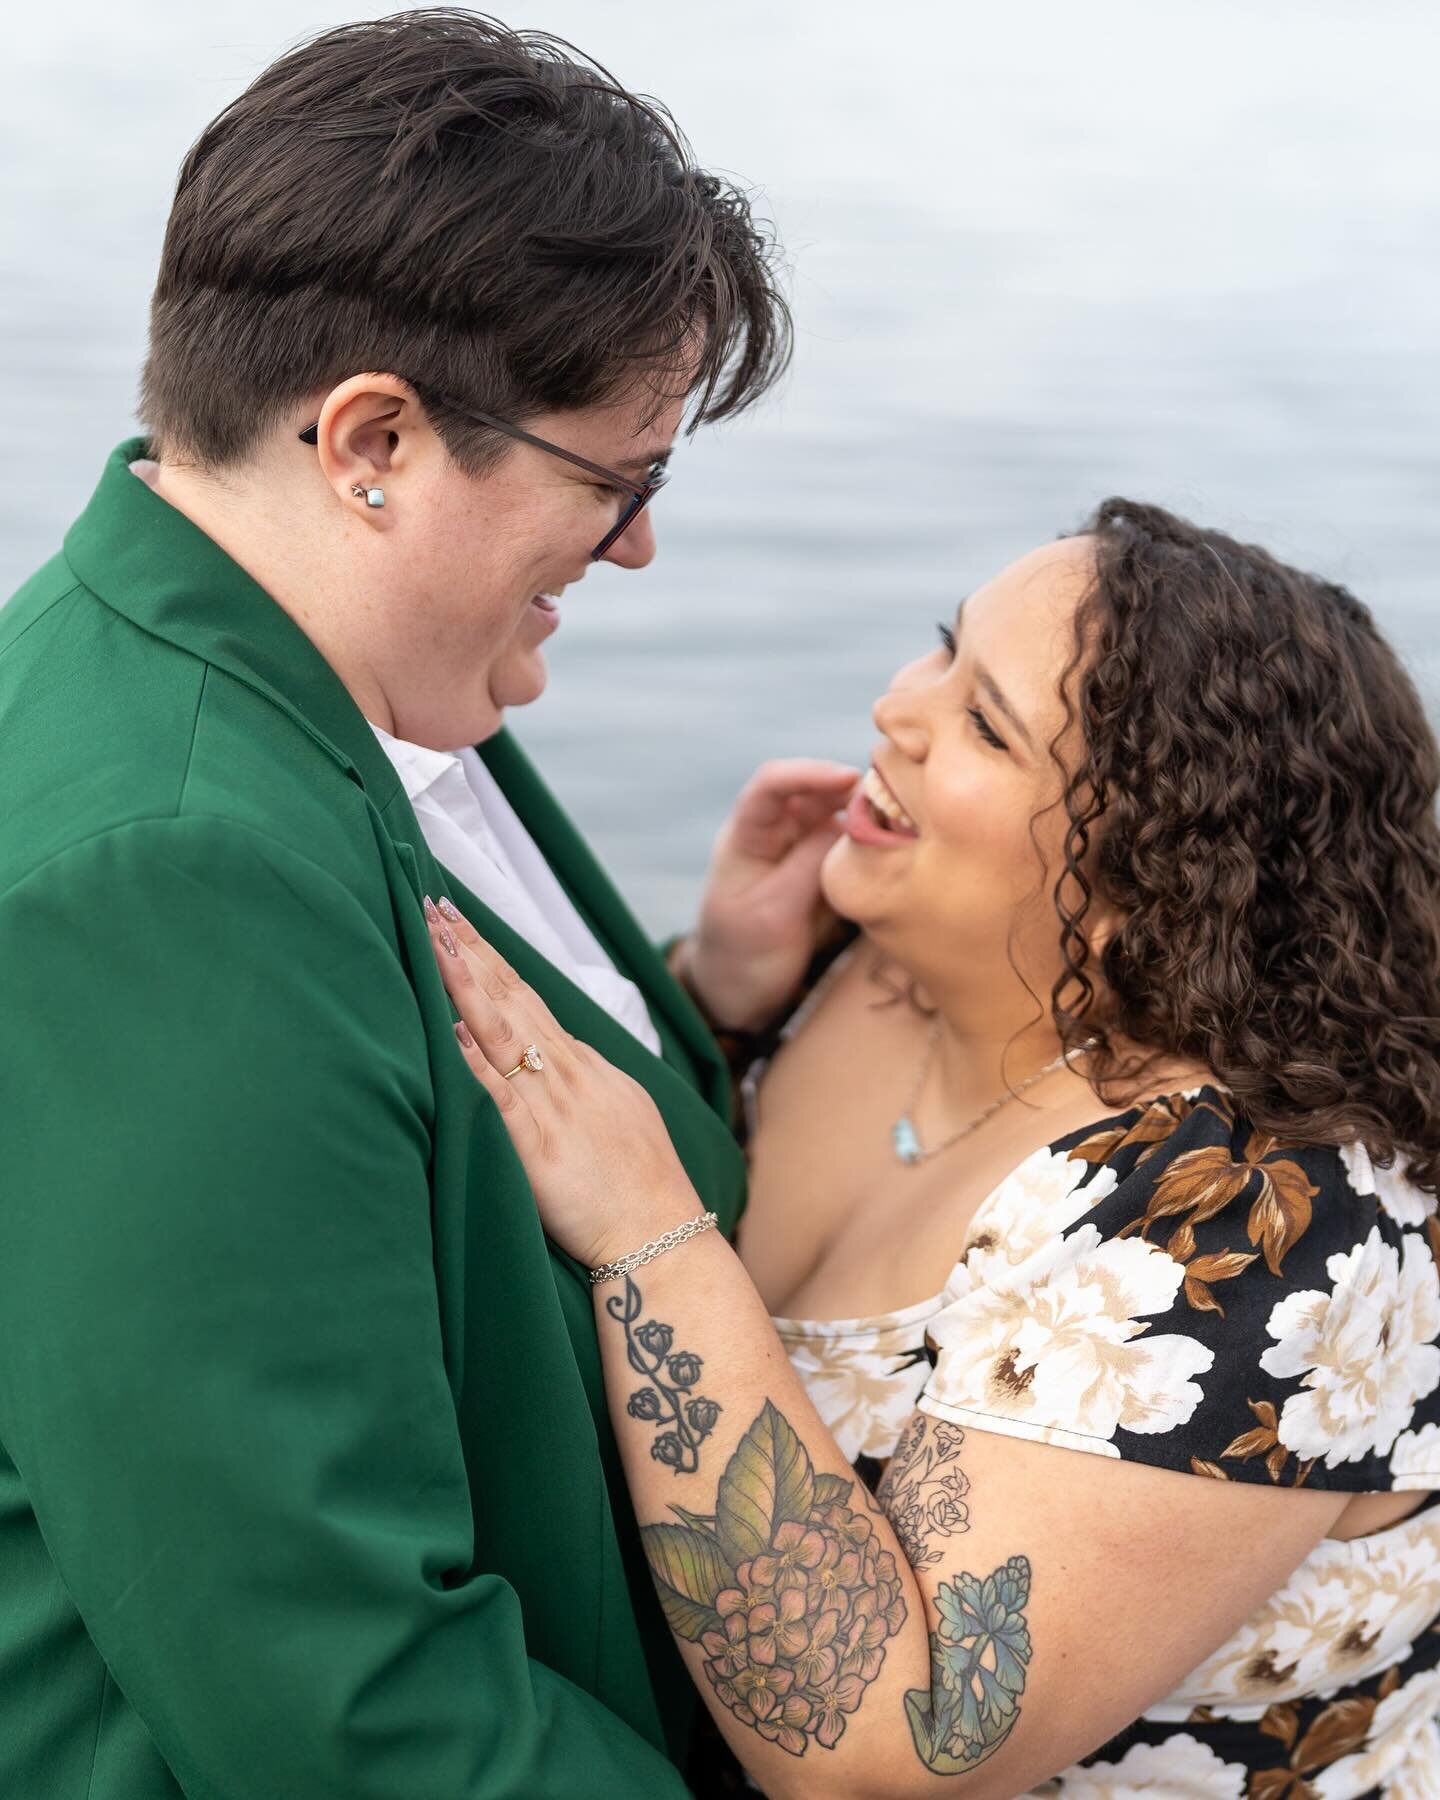 Find a partner who looks at you like this. Mattie and Bailey were such a joy to hang with this morning for their engagement session. Side note: we even saw a pod of harbor porpoises! 
#seattleengagement #seattleweddingphotographer #mrsandmrs #dancing